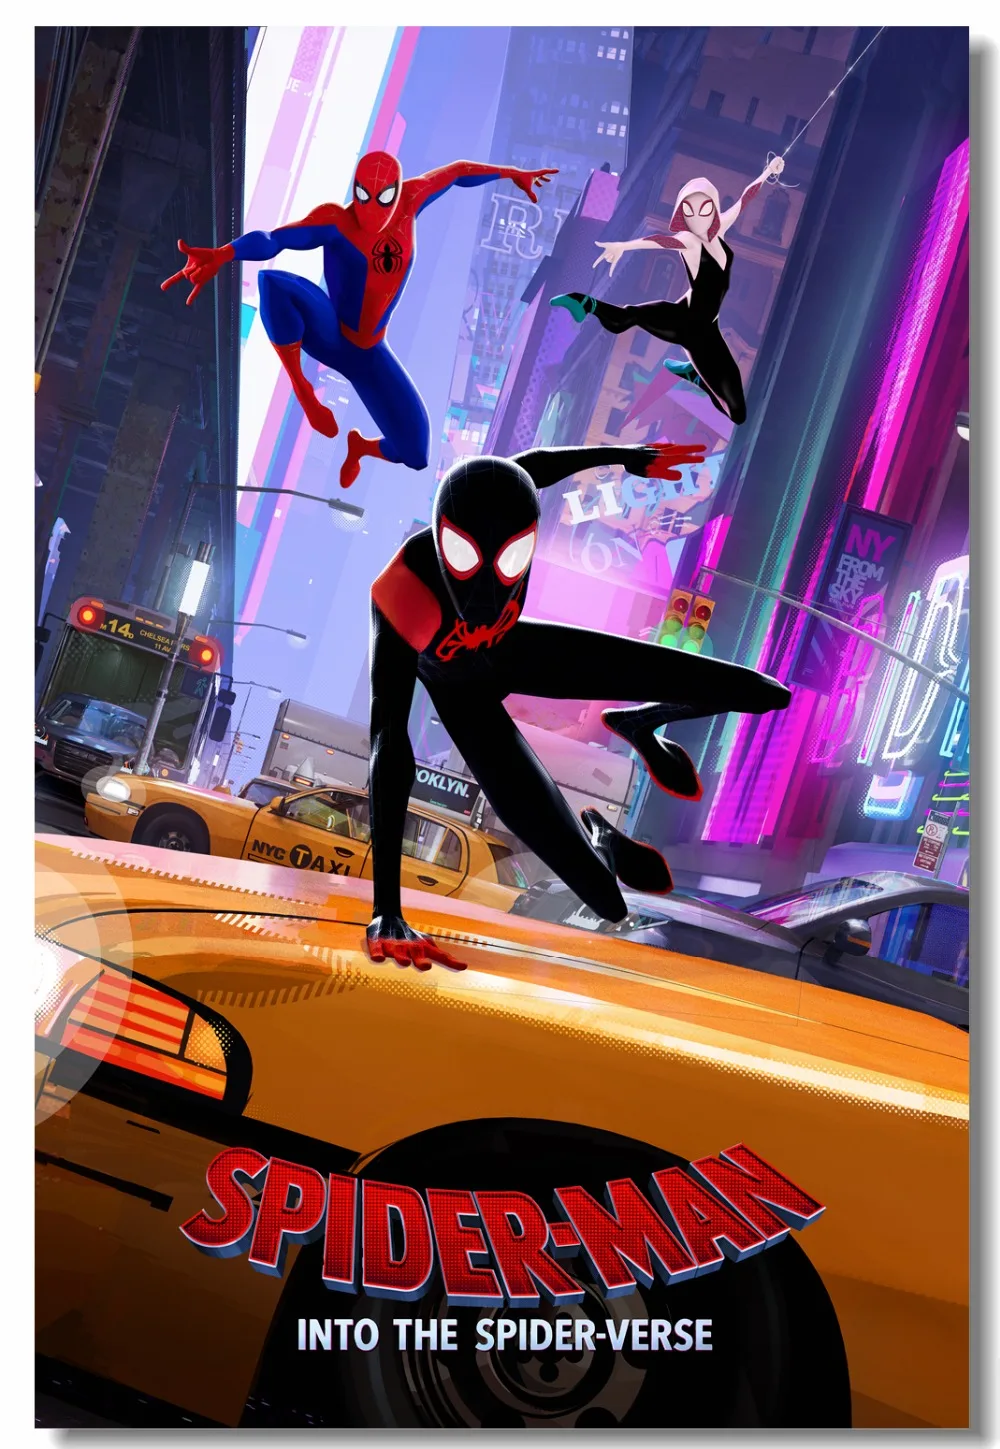 Custom Printing Canvas Wall Decorations Into The Spider-verse Poster Spider-gwen  Wall Stickers Kid Nursery Room Wallpaper #0139# - Wall Stickers - AliExpress